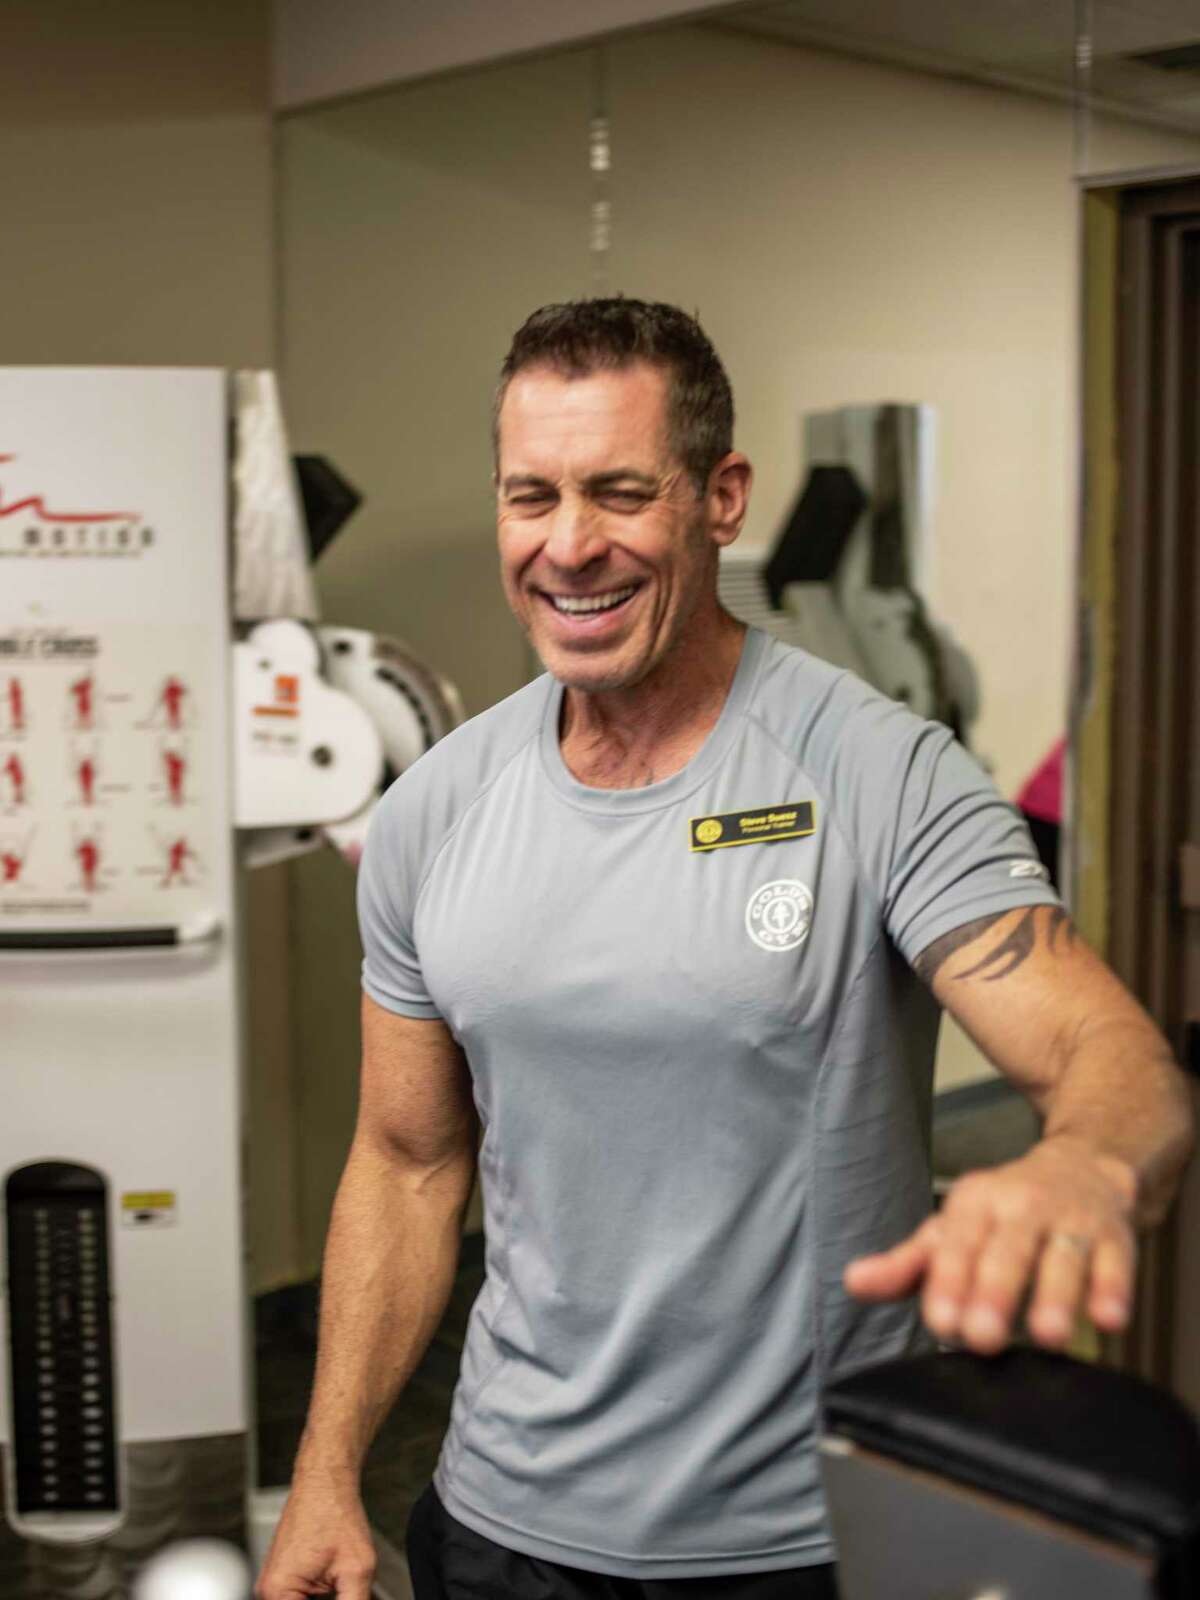 Personal trainer Steve Suesz, 61, shares a laugh with his client, Rose Ramirez (not pictured) at the Gold’s Gym in in Hill Country Village. Suesz, who has a certification in senior fitness, says that as people get older, their muscle strength atrophies, and it becomes easier for their bones to break.